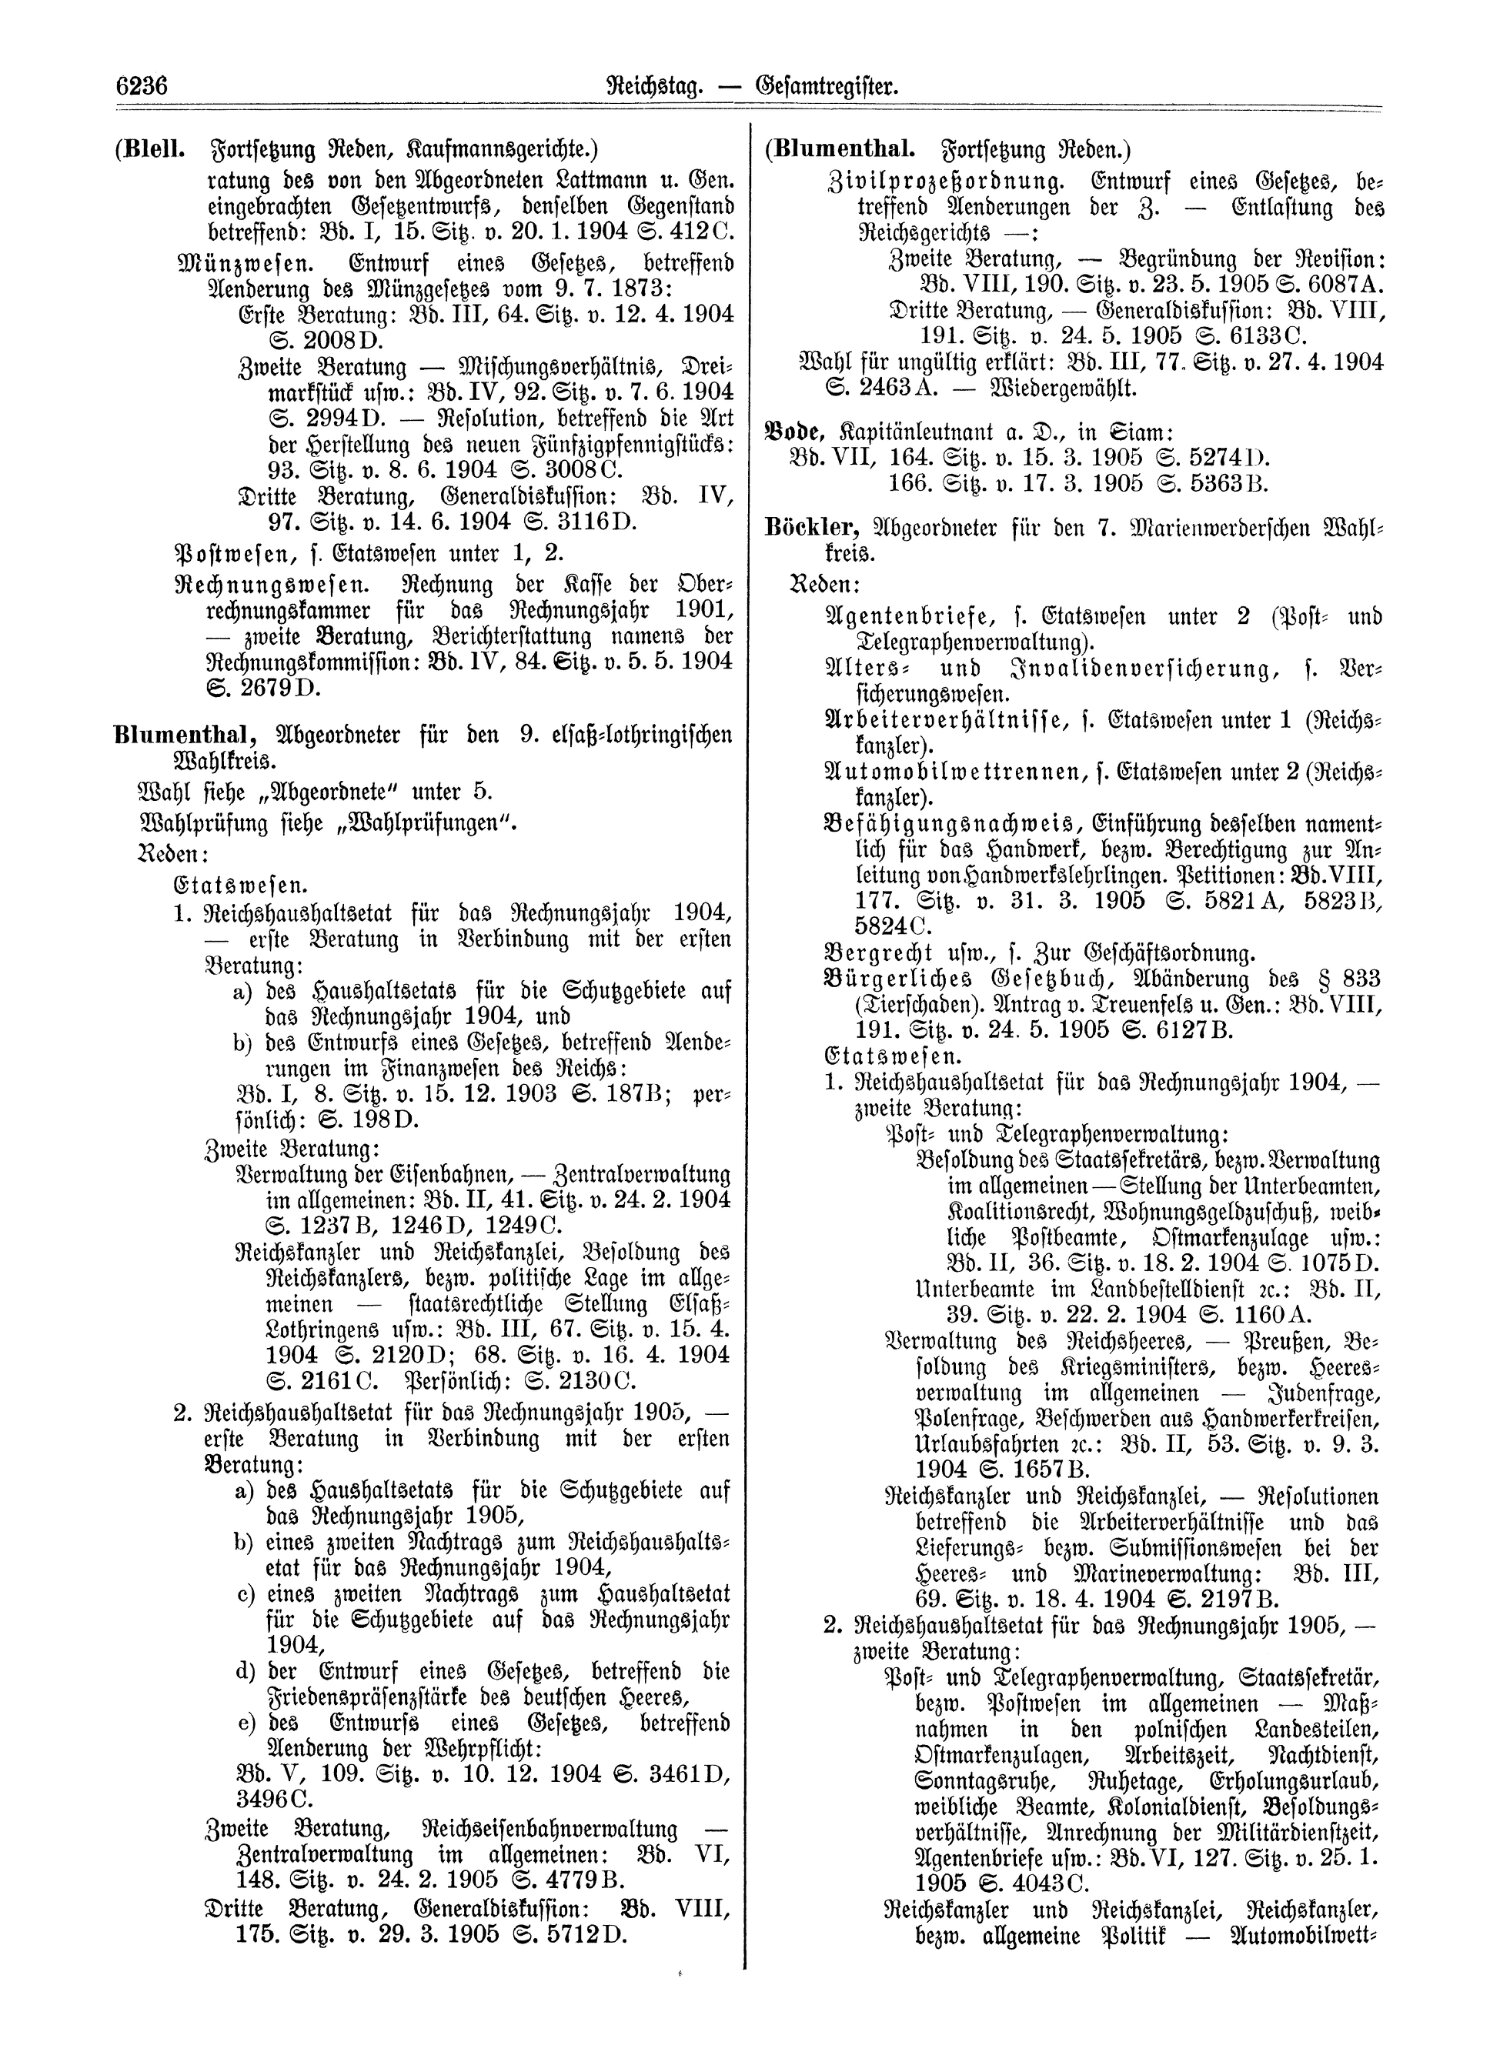 Scan of page 6236